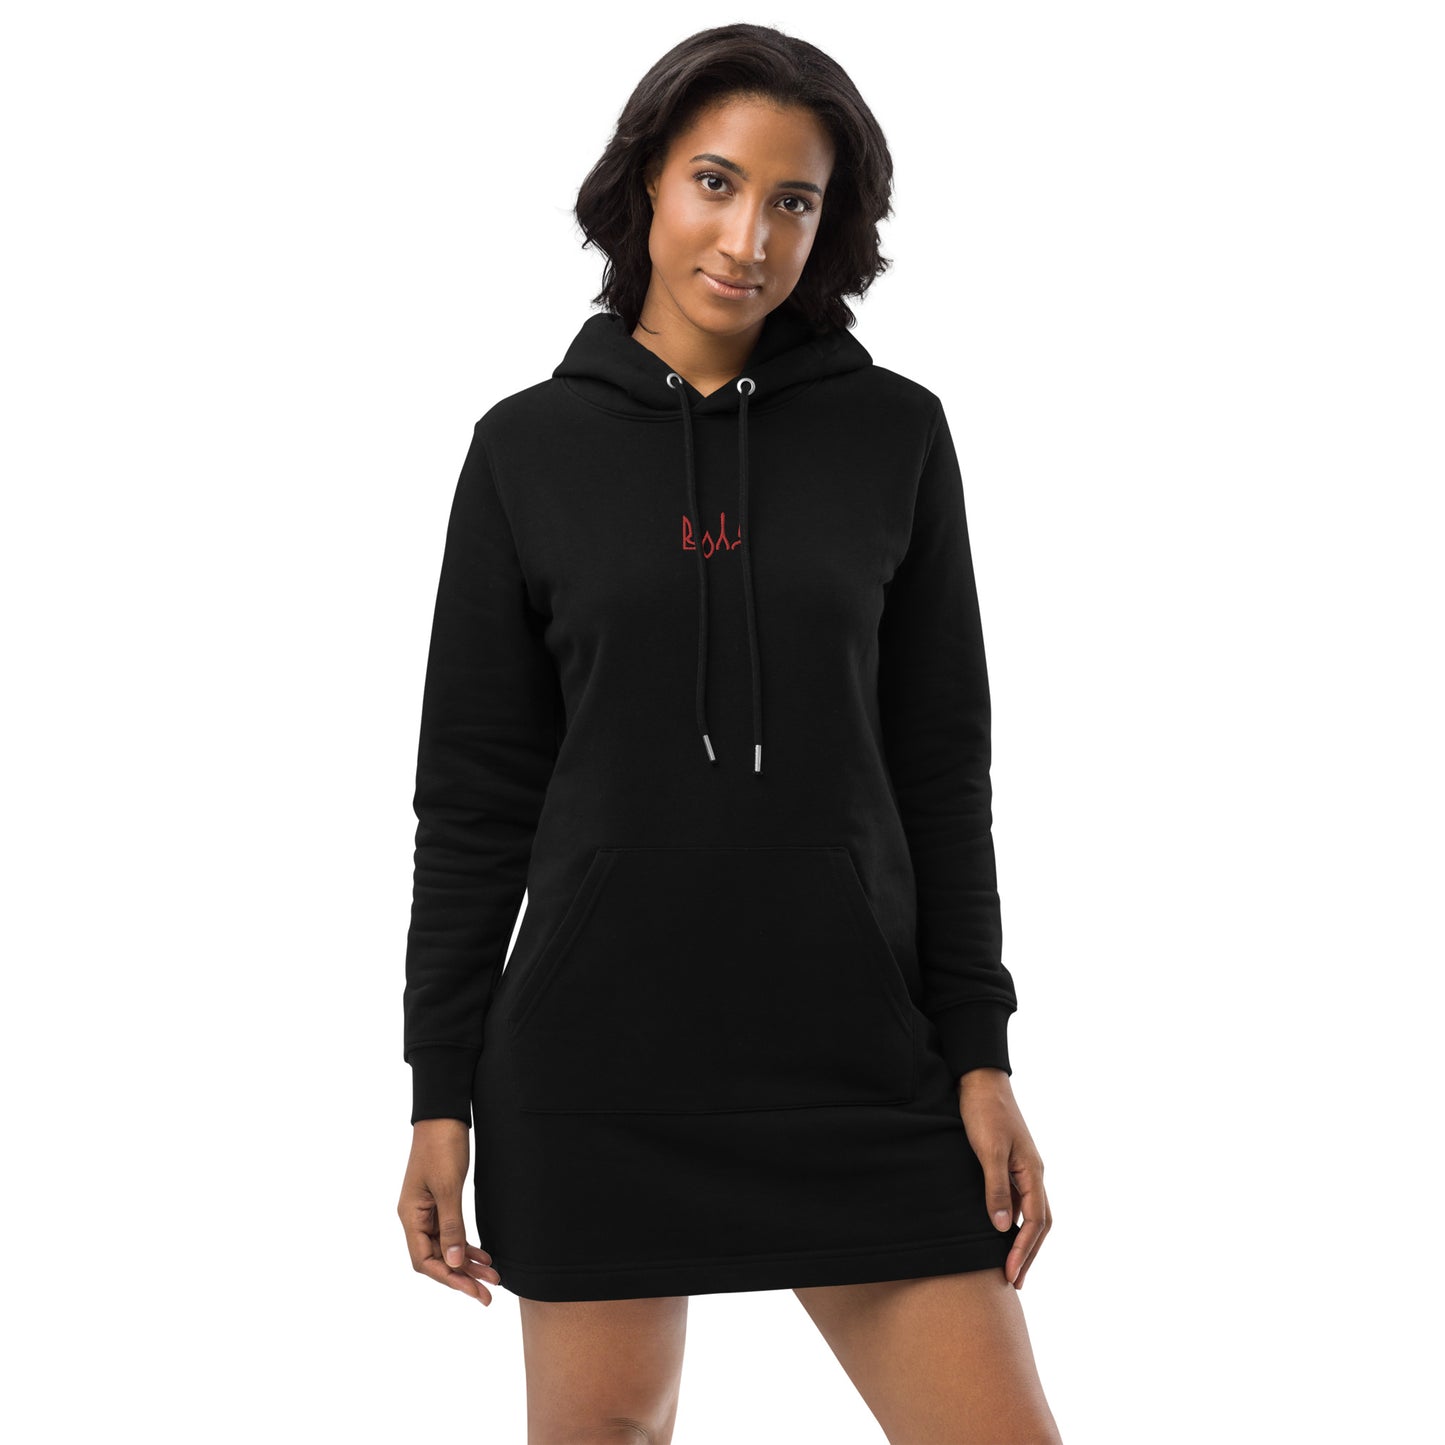 VOLYA Woman hoodie dress with embroidery in black